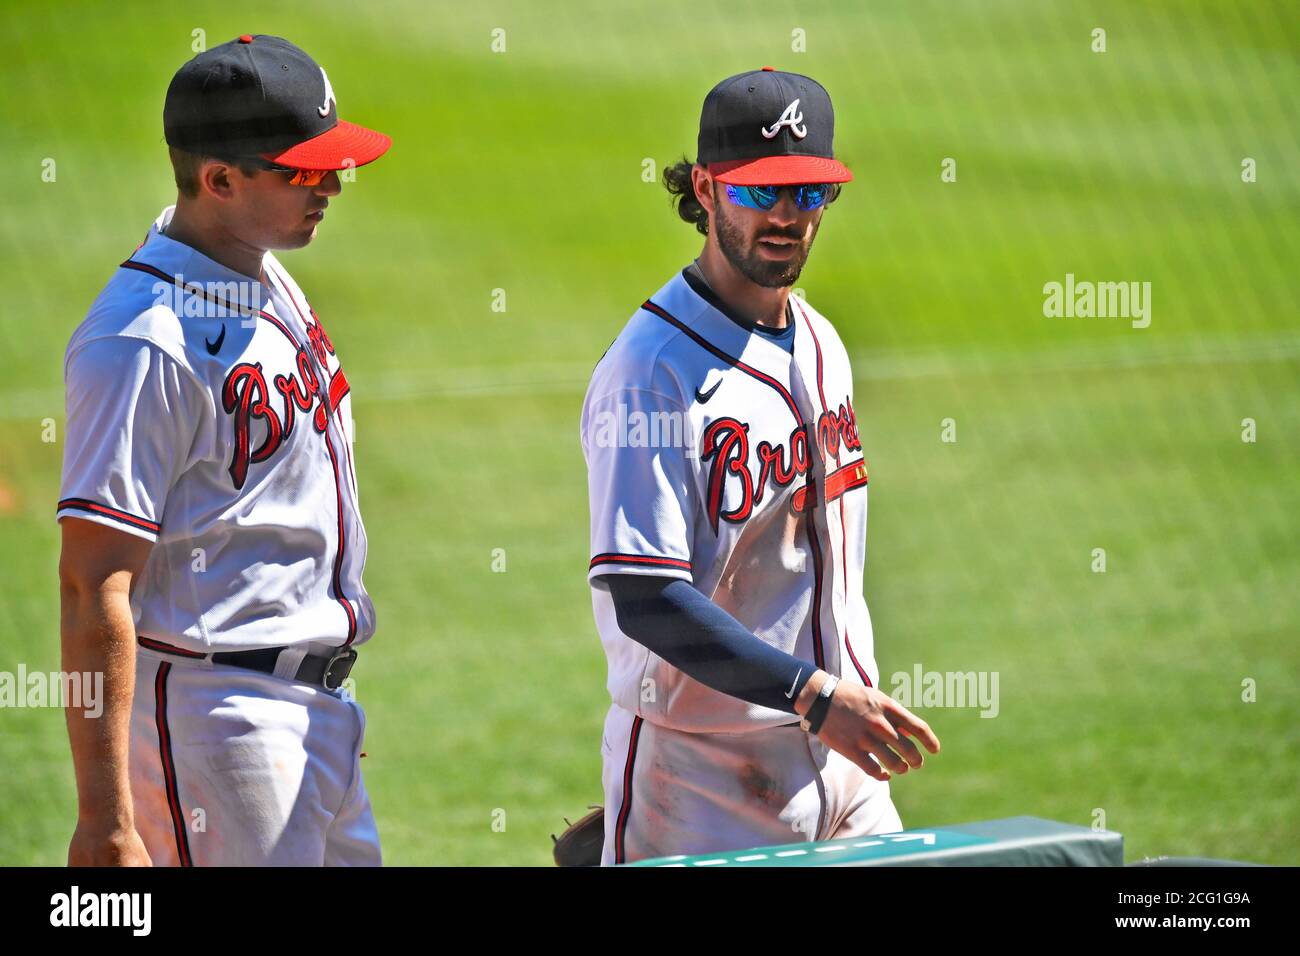 Atlanta, GA, USA. 07th Sep, 2020. Braves shortstop Dansby Swanson (right)  talks with third baseman Austin Riley (left) as they walk towards the  dugout during the sixth inning of a MLB game